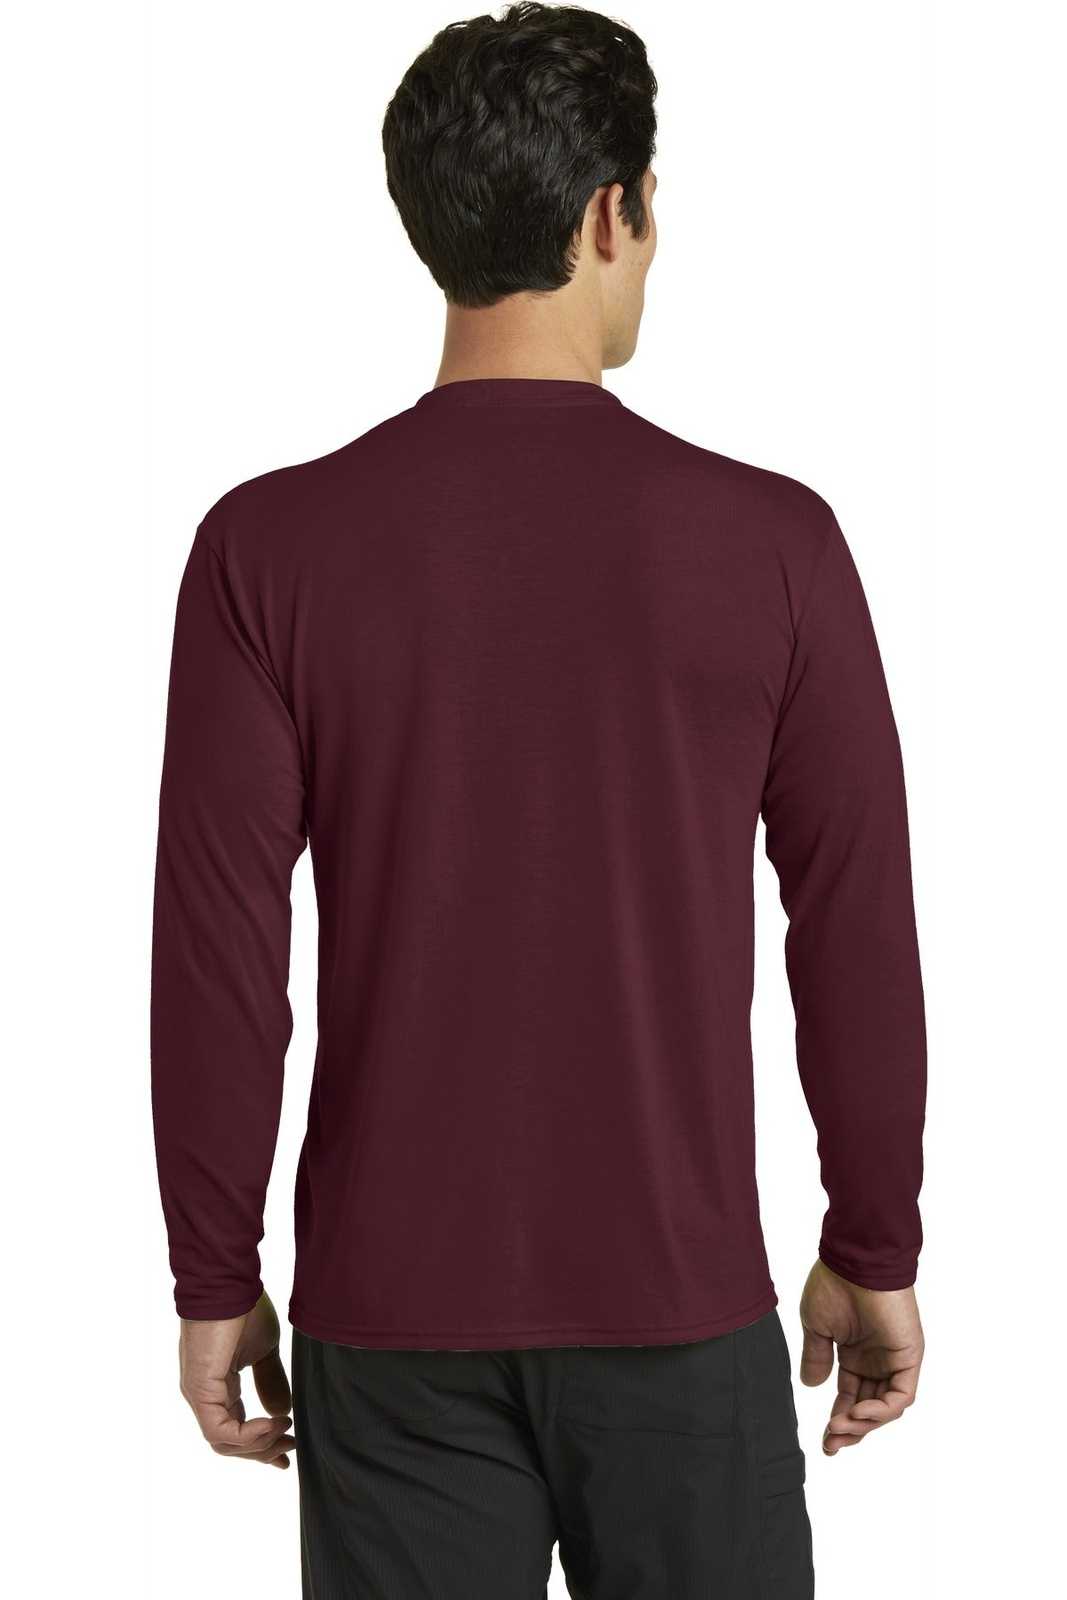 Port & Company PC381LS Long Sleeve Performance Blend Tee - Athletic Maroon - HIT a Double - 1